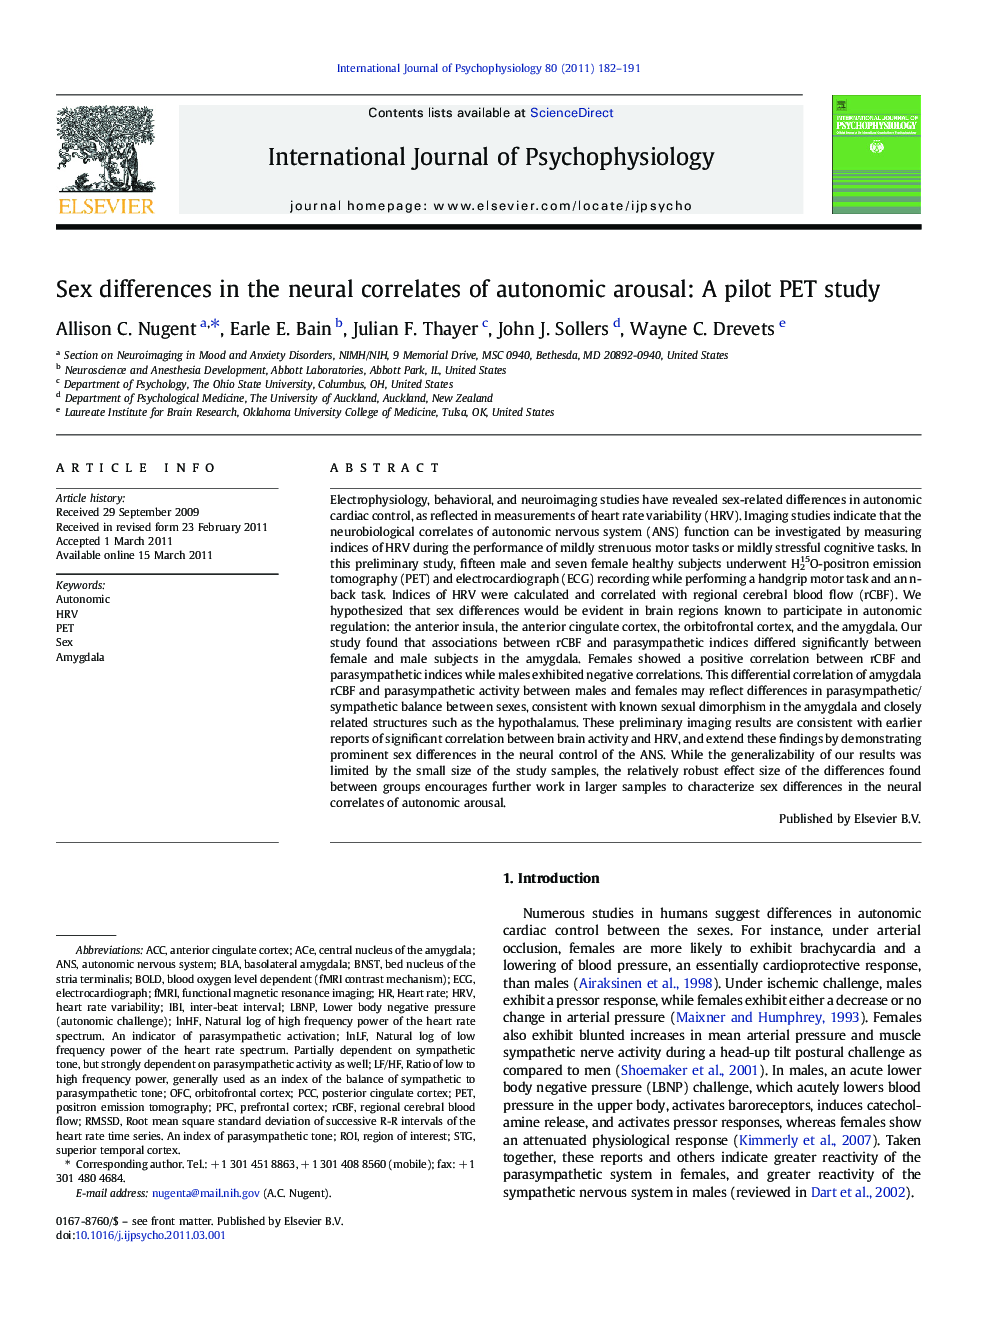 Sex differences in the neural correlates of autonomic arousal: A pilot PET study